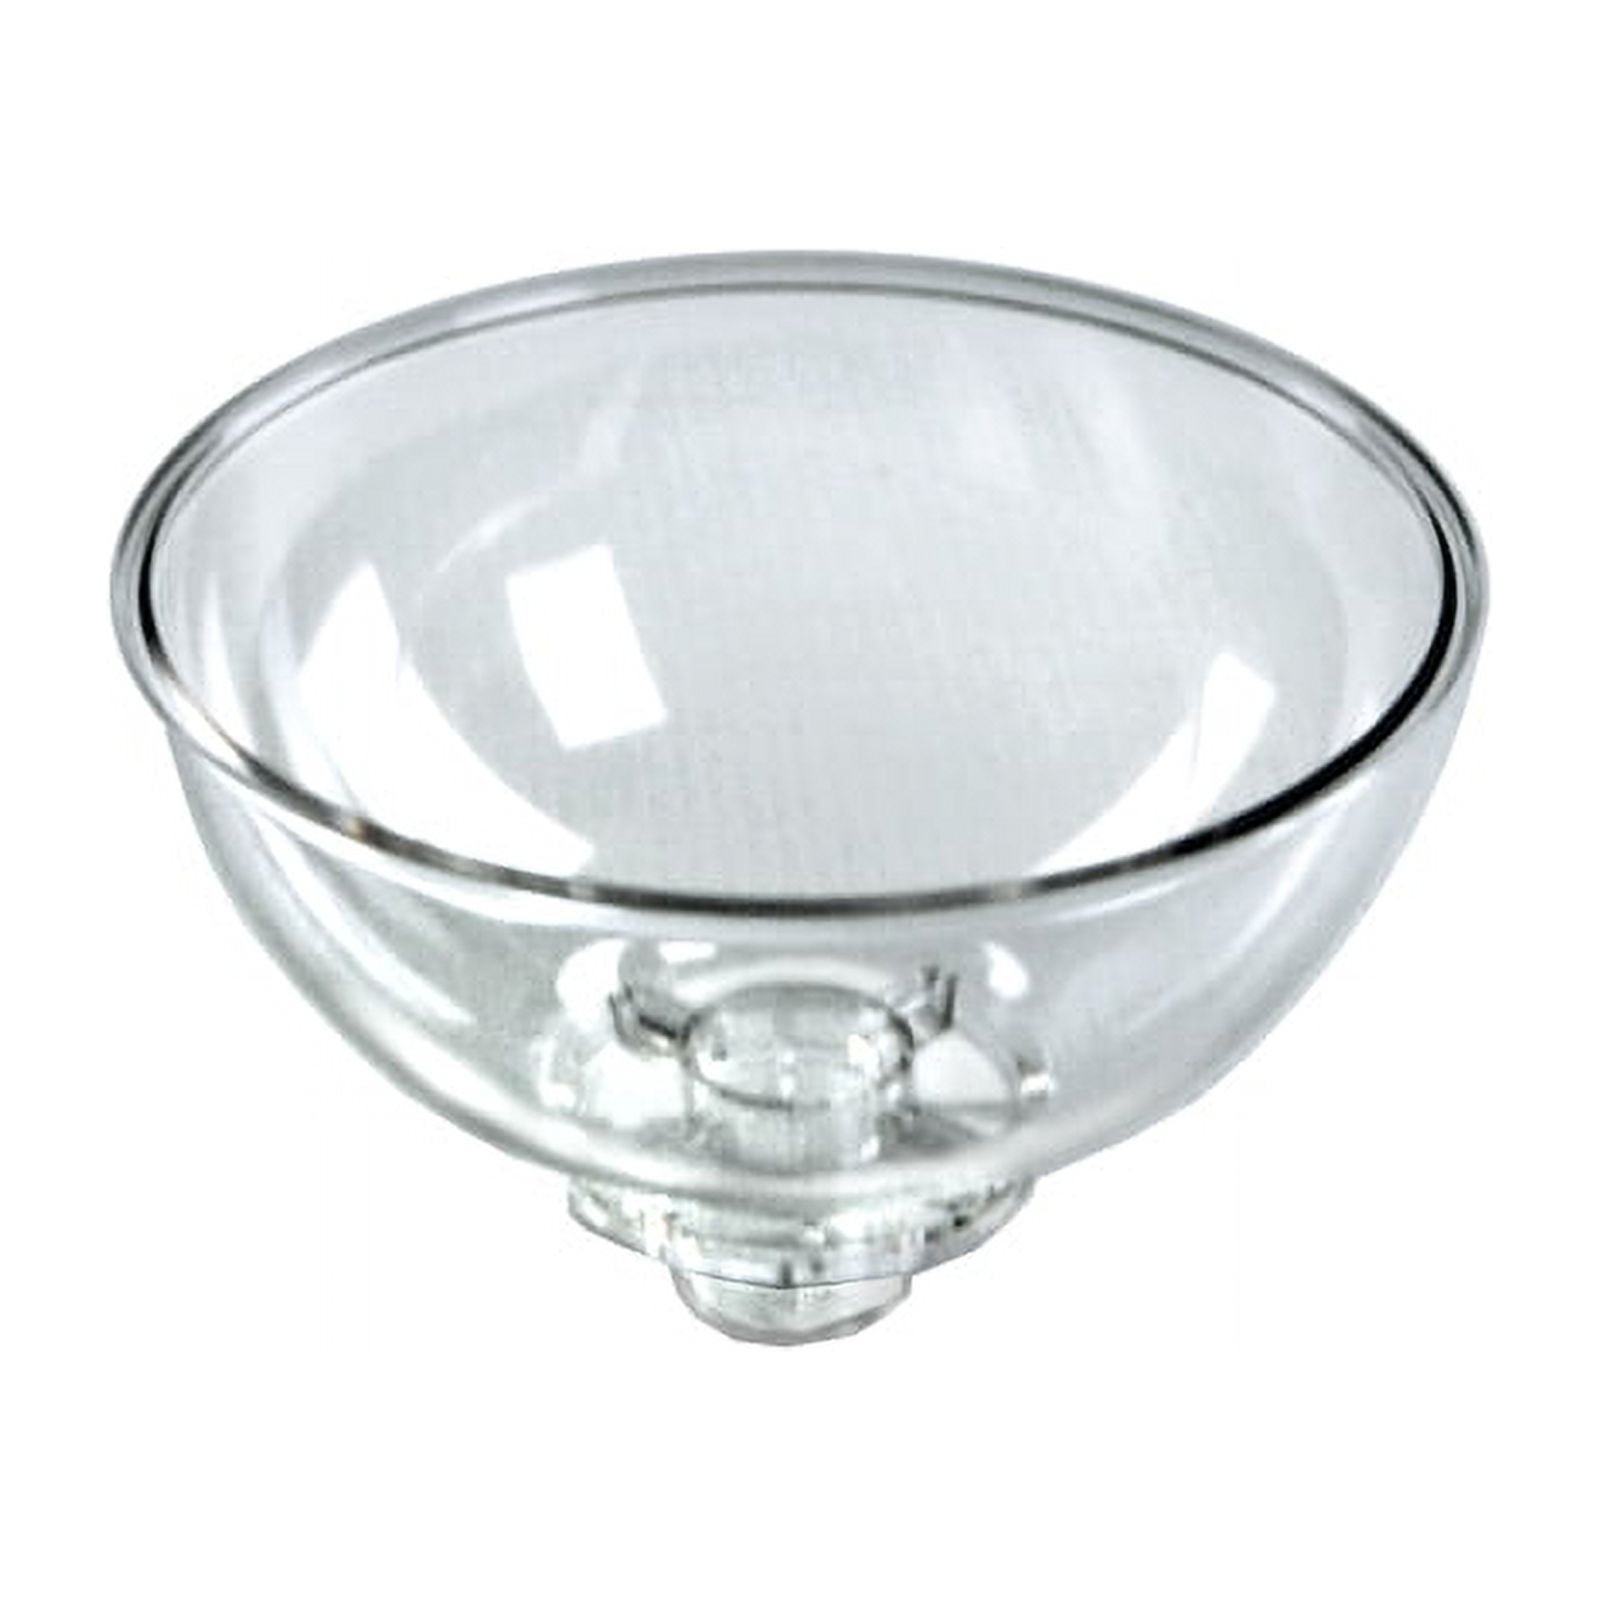 Plastic Hanging Bowl 8 Inch, Clear Displays